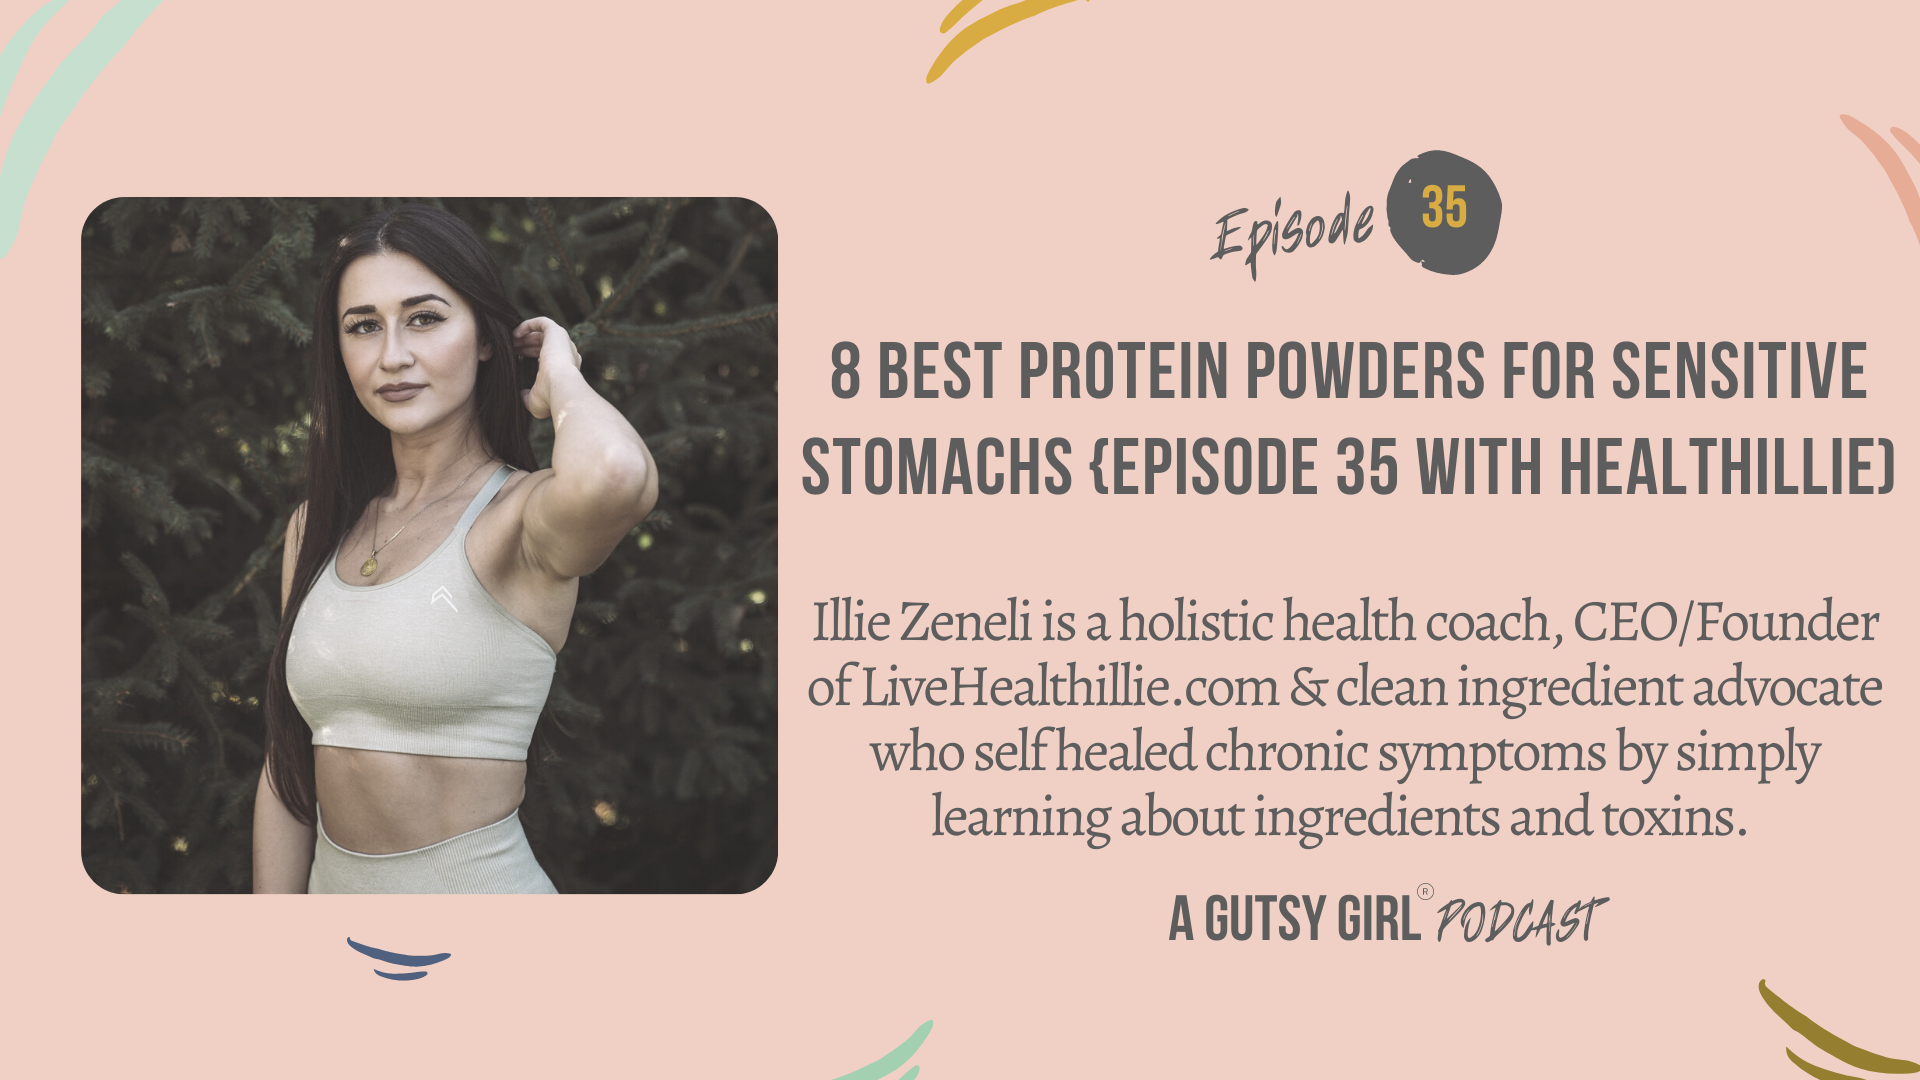 8 Best Protein Powders for Sensitive Stomachs {Episode 35 with Healthillie)￼